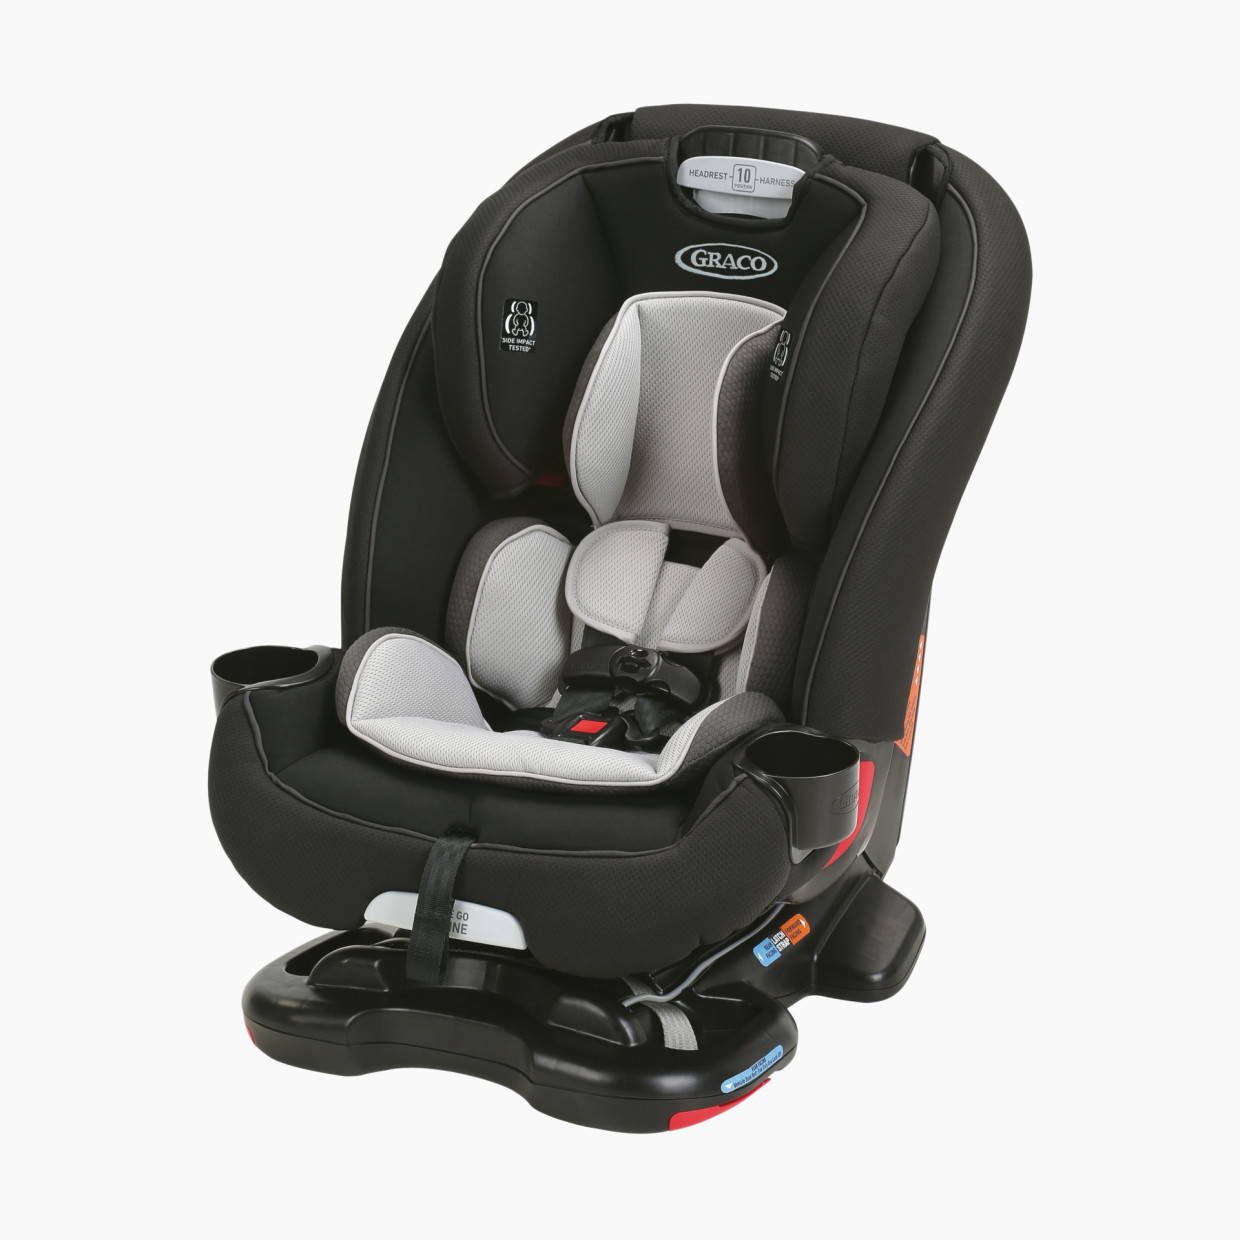 Graco Recline N' Ride All-in-One Convertible Car Seat - Murphy.